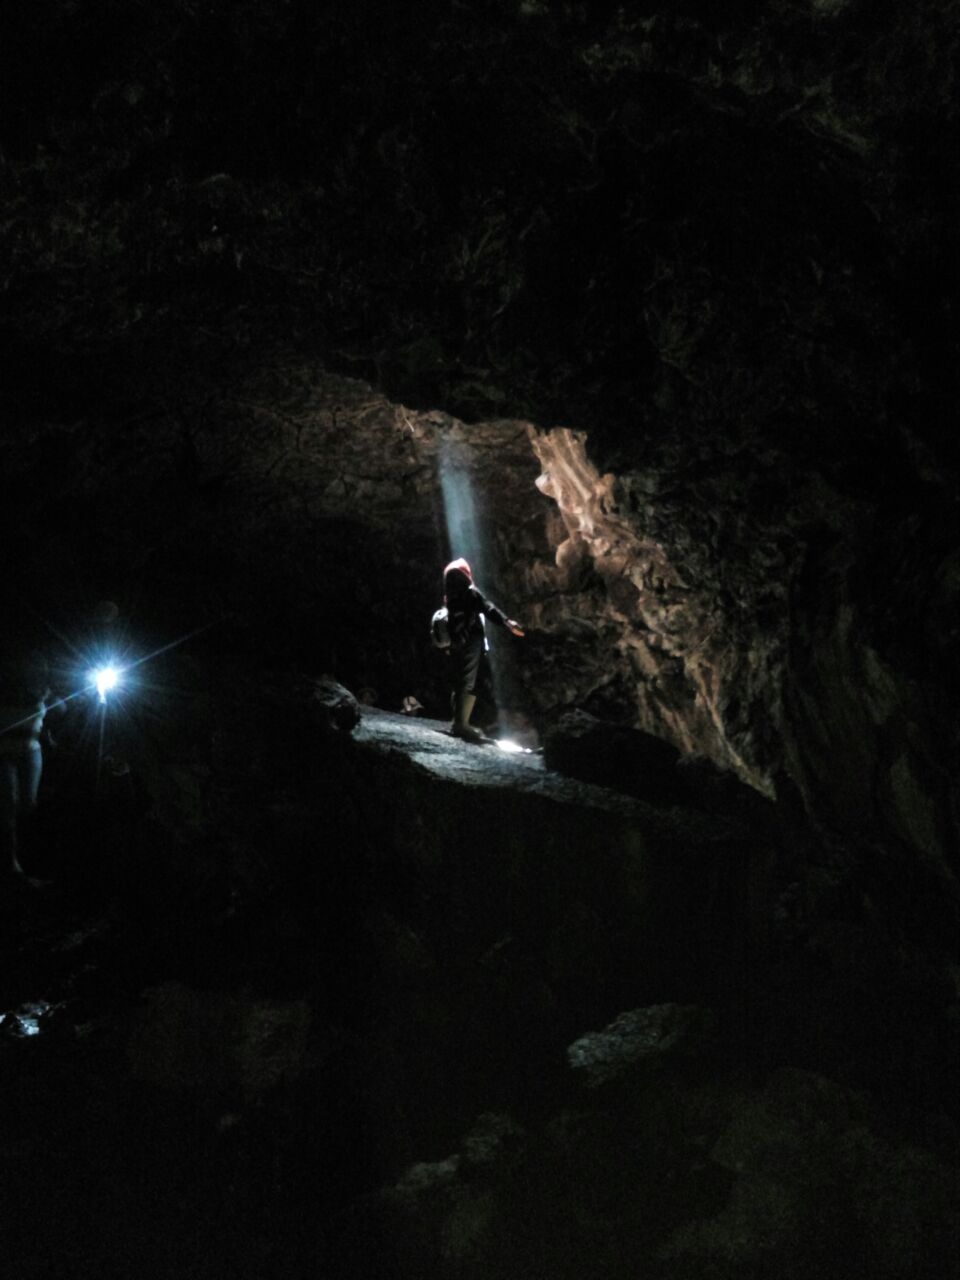 Recommended Cave Attractions in Lampung, No. 4 Close to Bandar Lampung